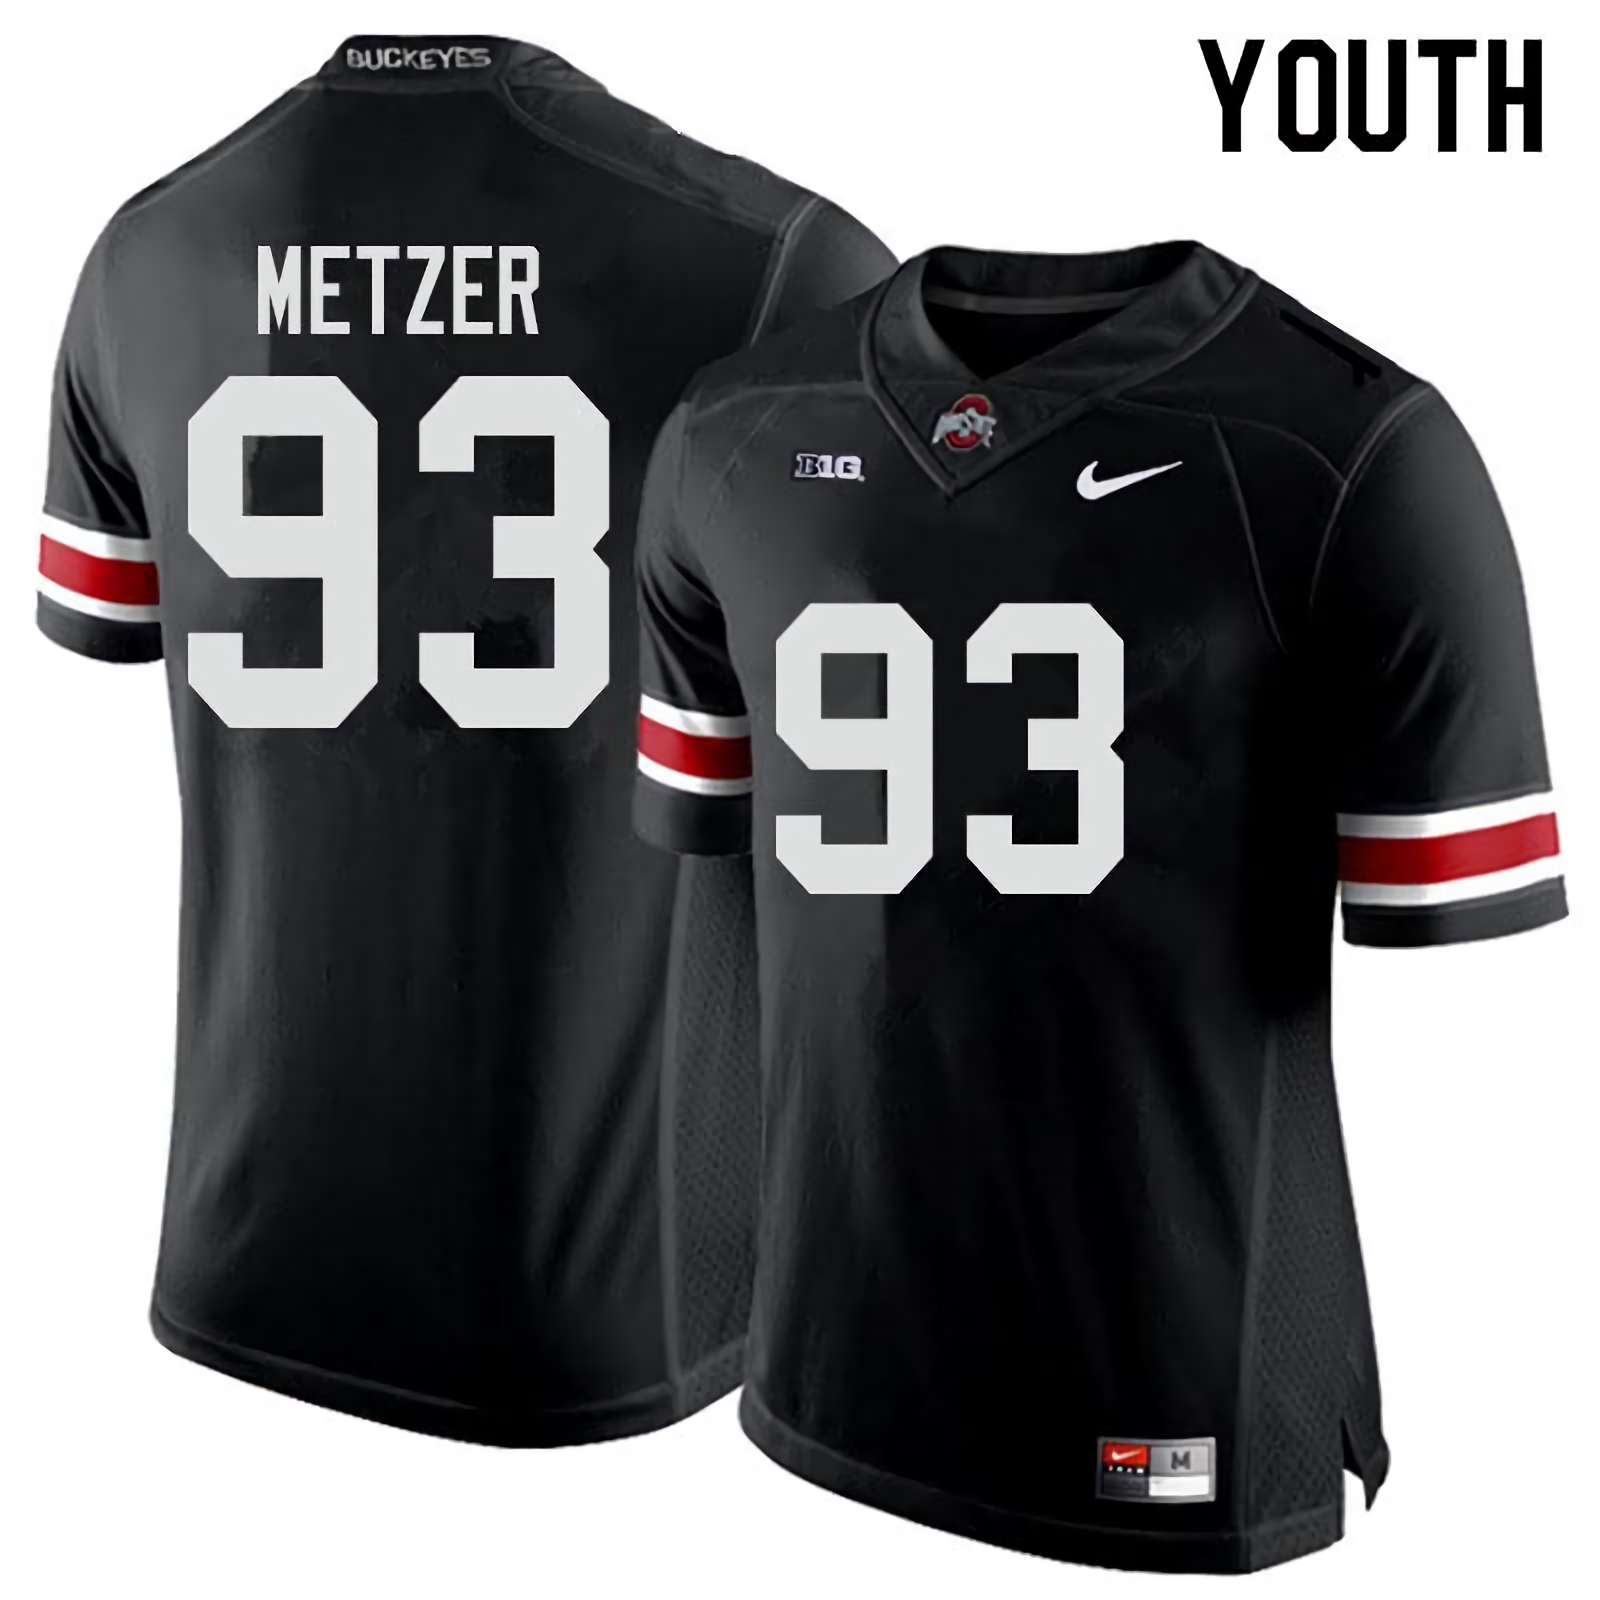 Jake Metzer Ohio State Buckeyes Youth NCAA #93 Nike Black College Stitched Football Jersey QTX6356VZ